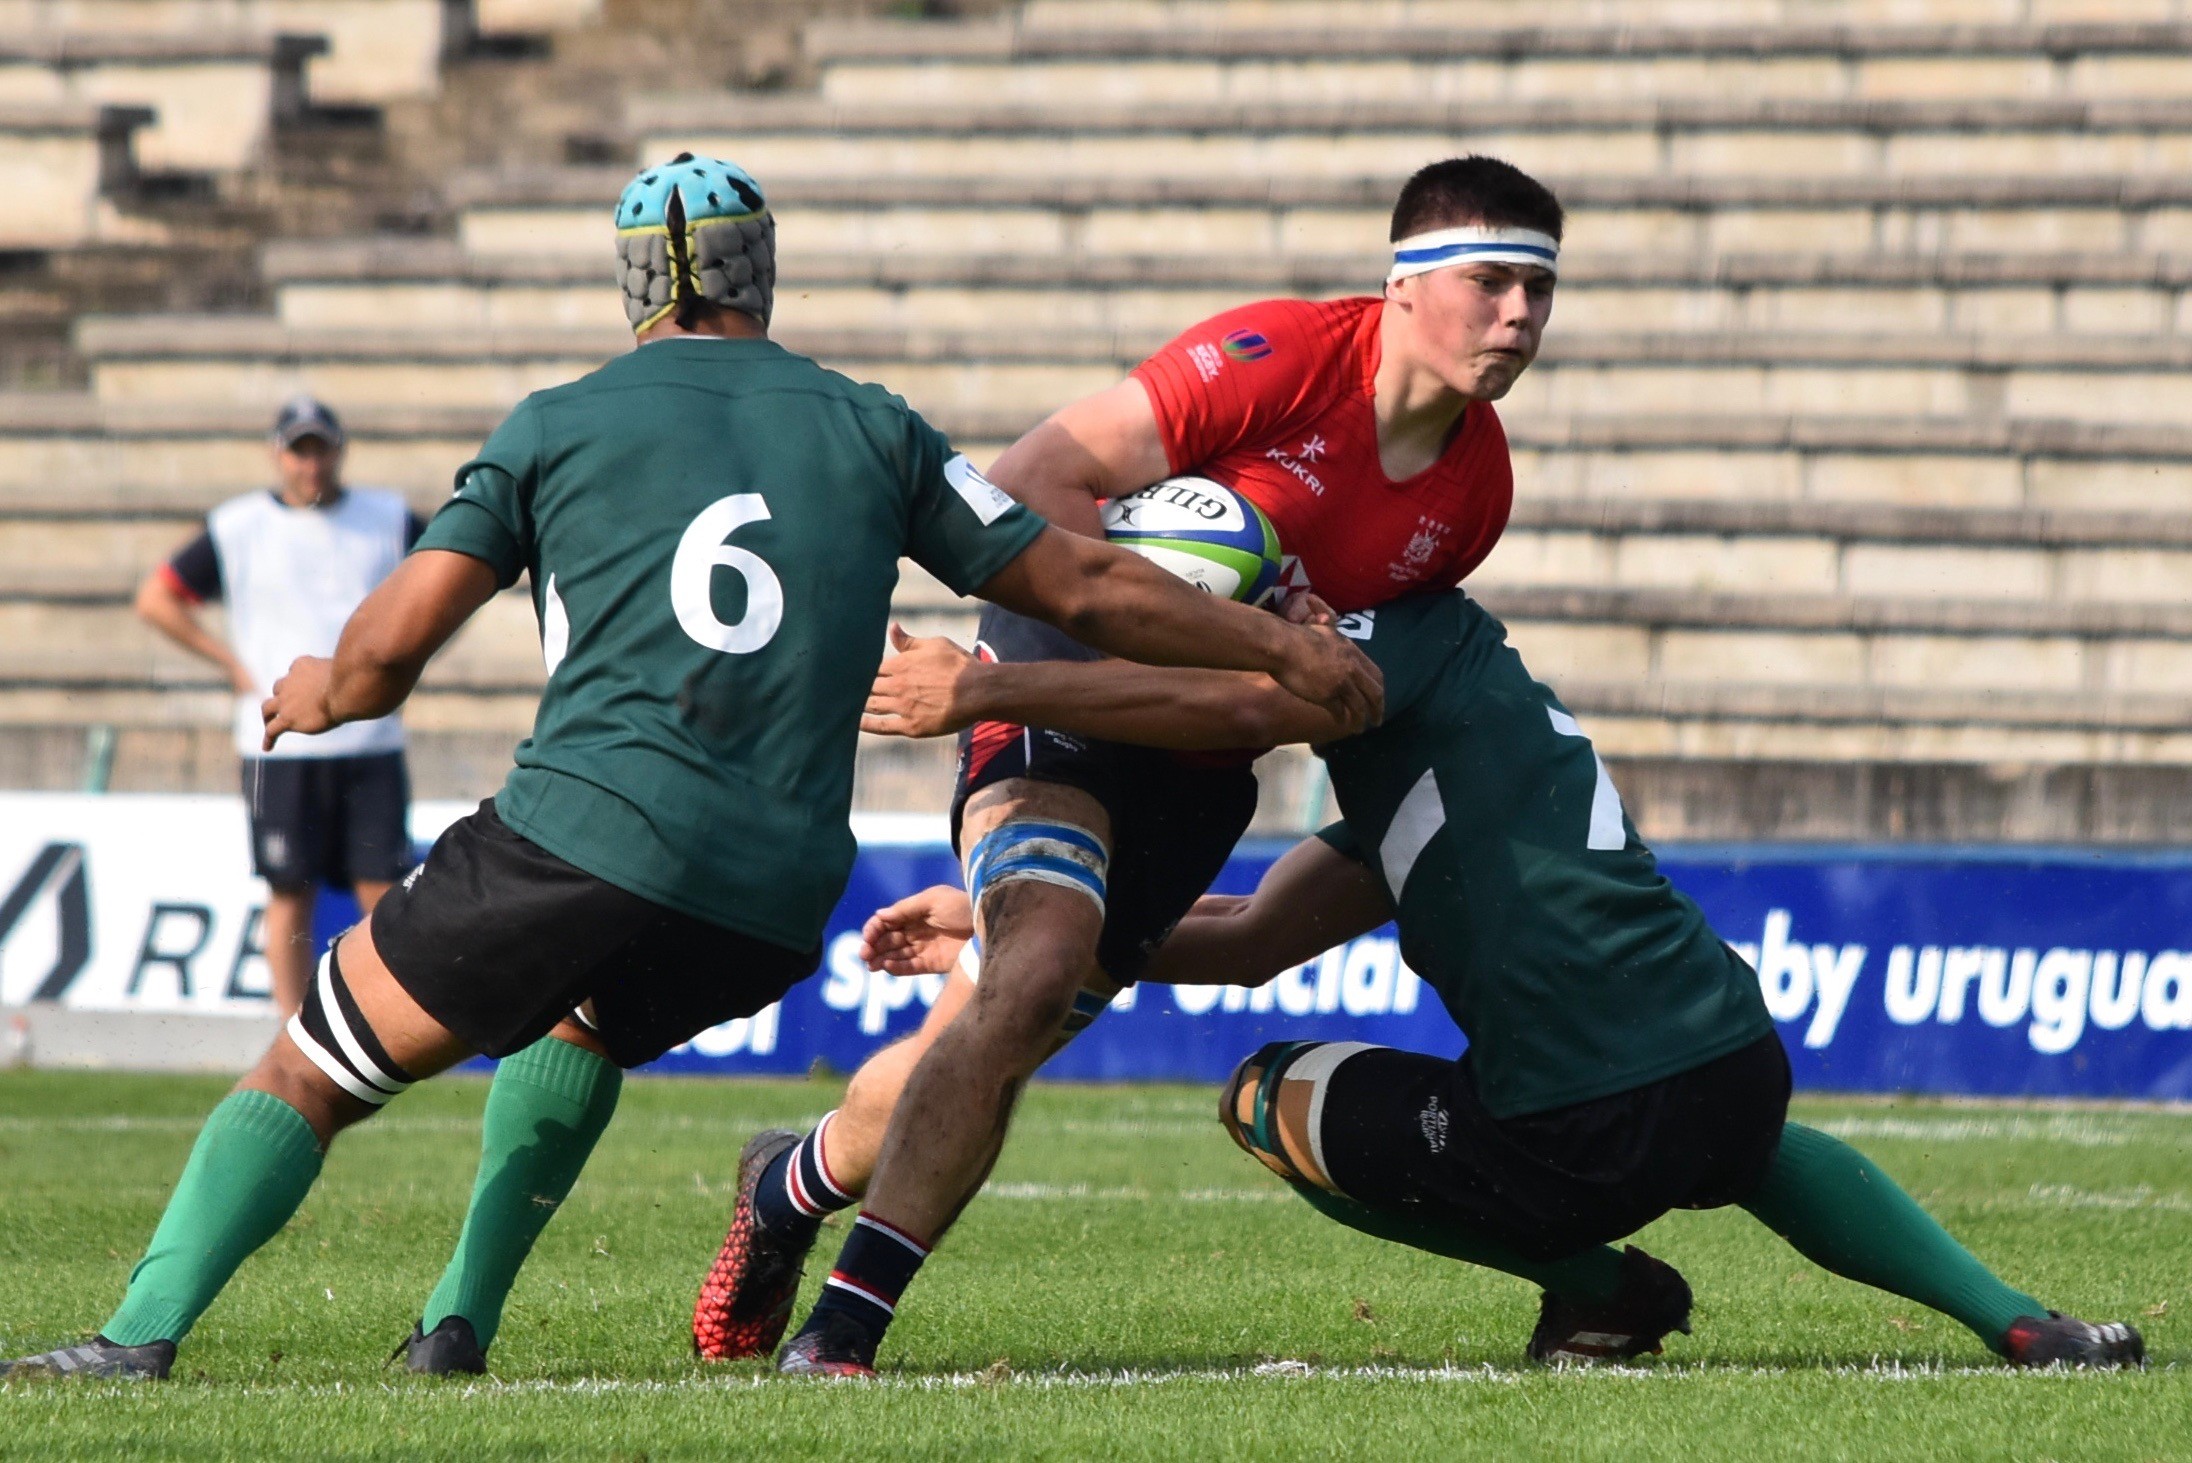 Hong Kong's Jake Barlow is stopped in his tracks against Portugal. Photos: HKRU